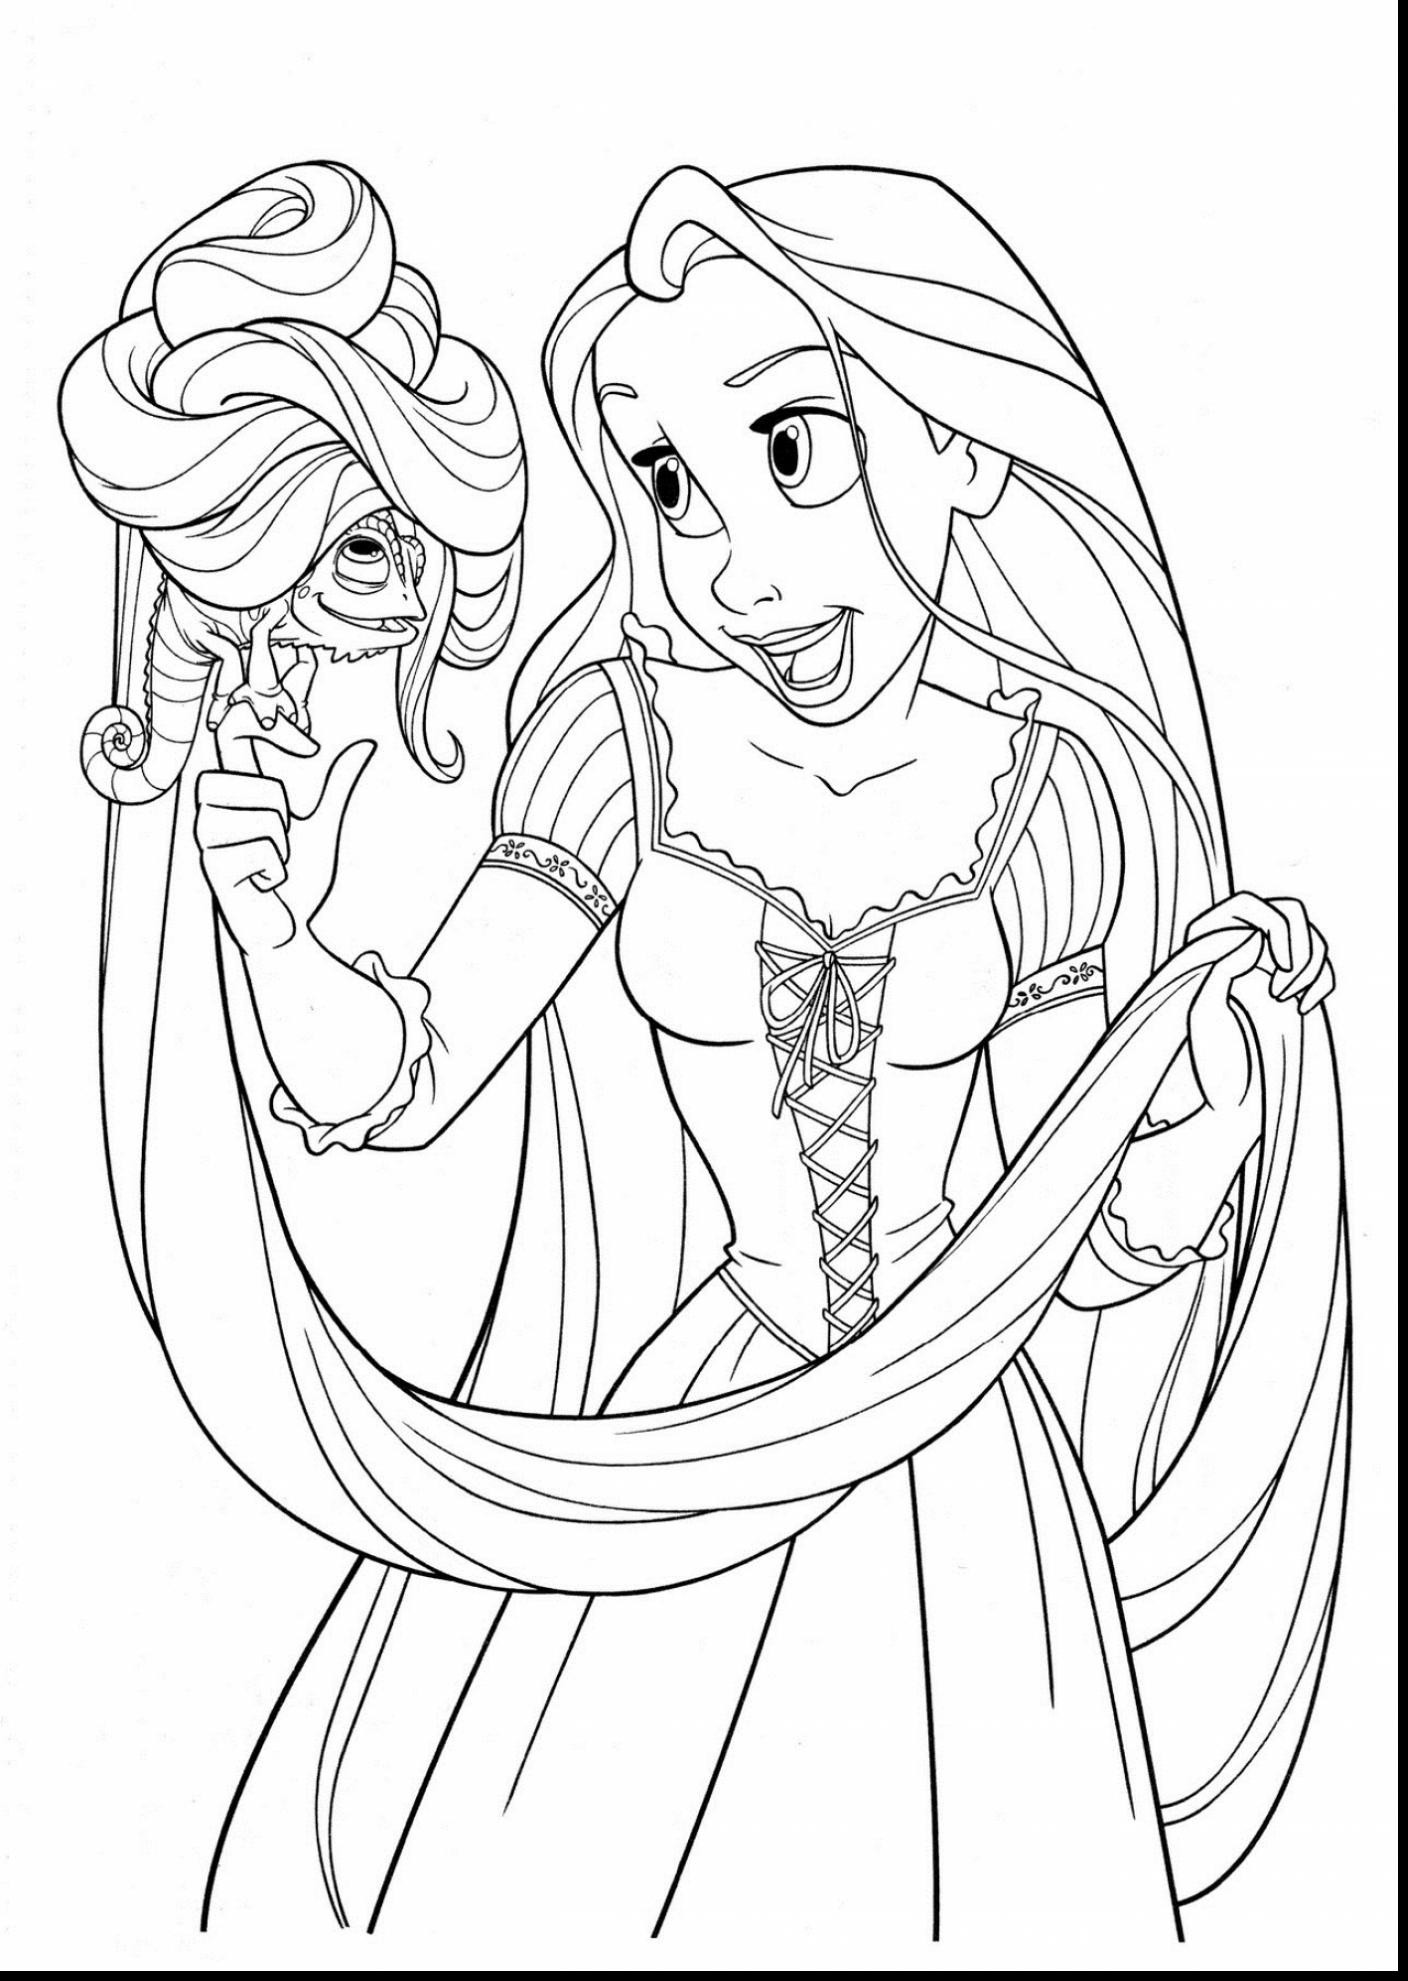 Coloring pages new printable full size disney coloring pages